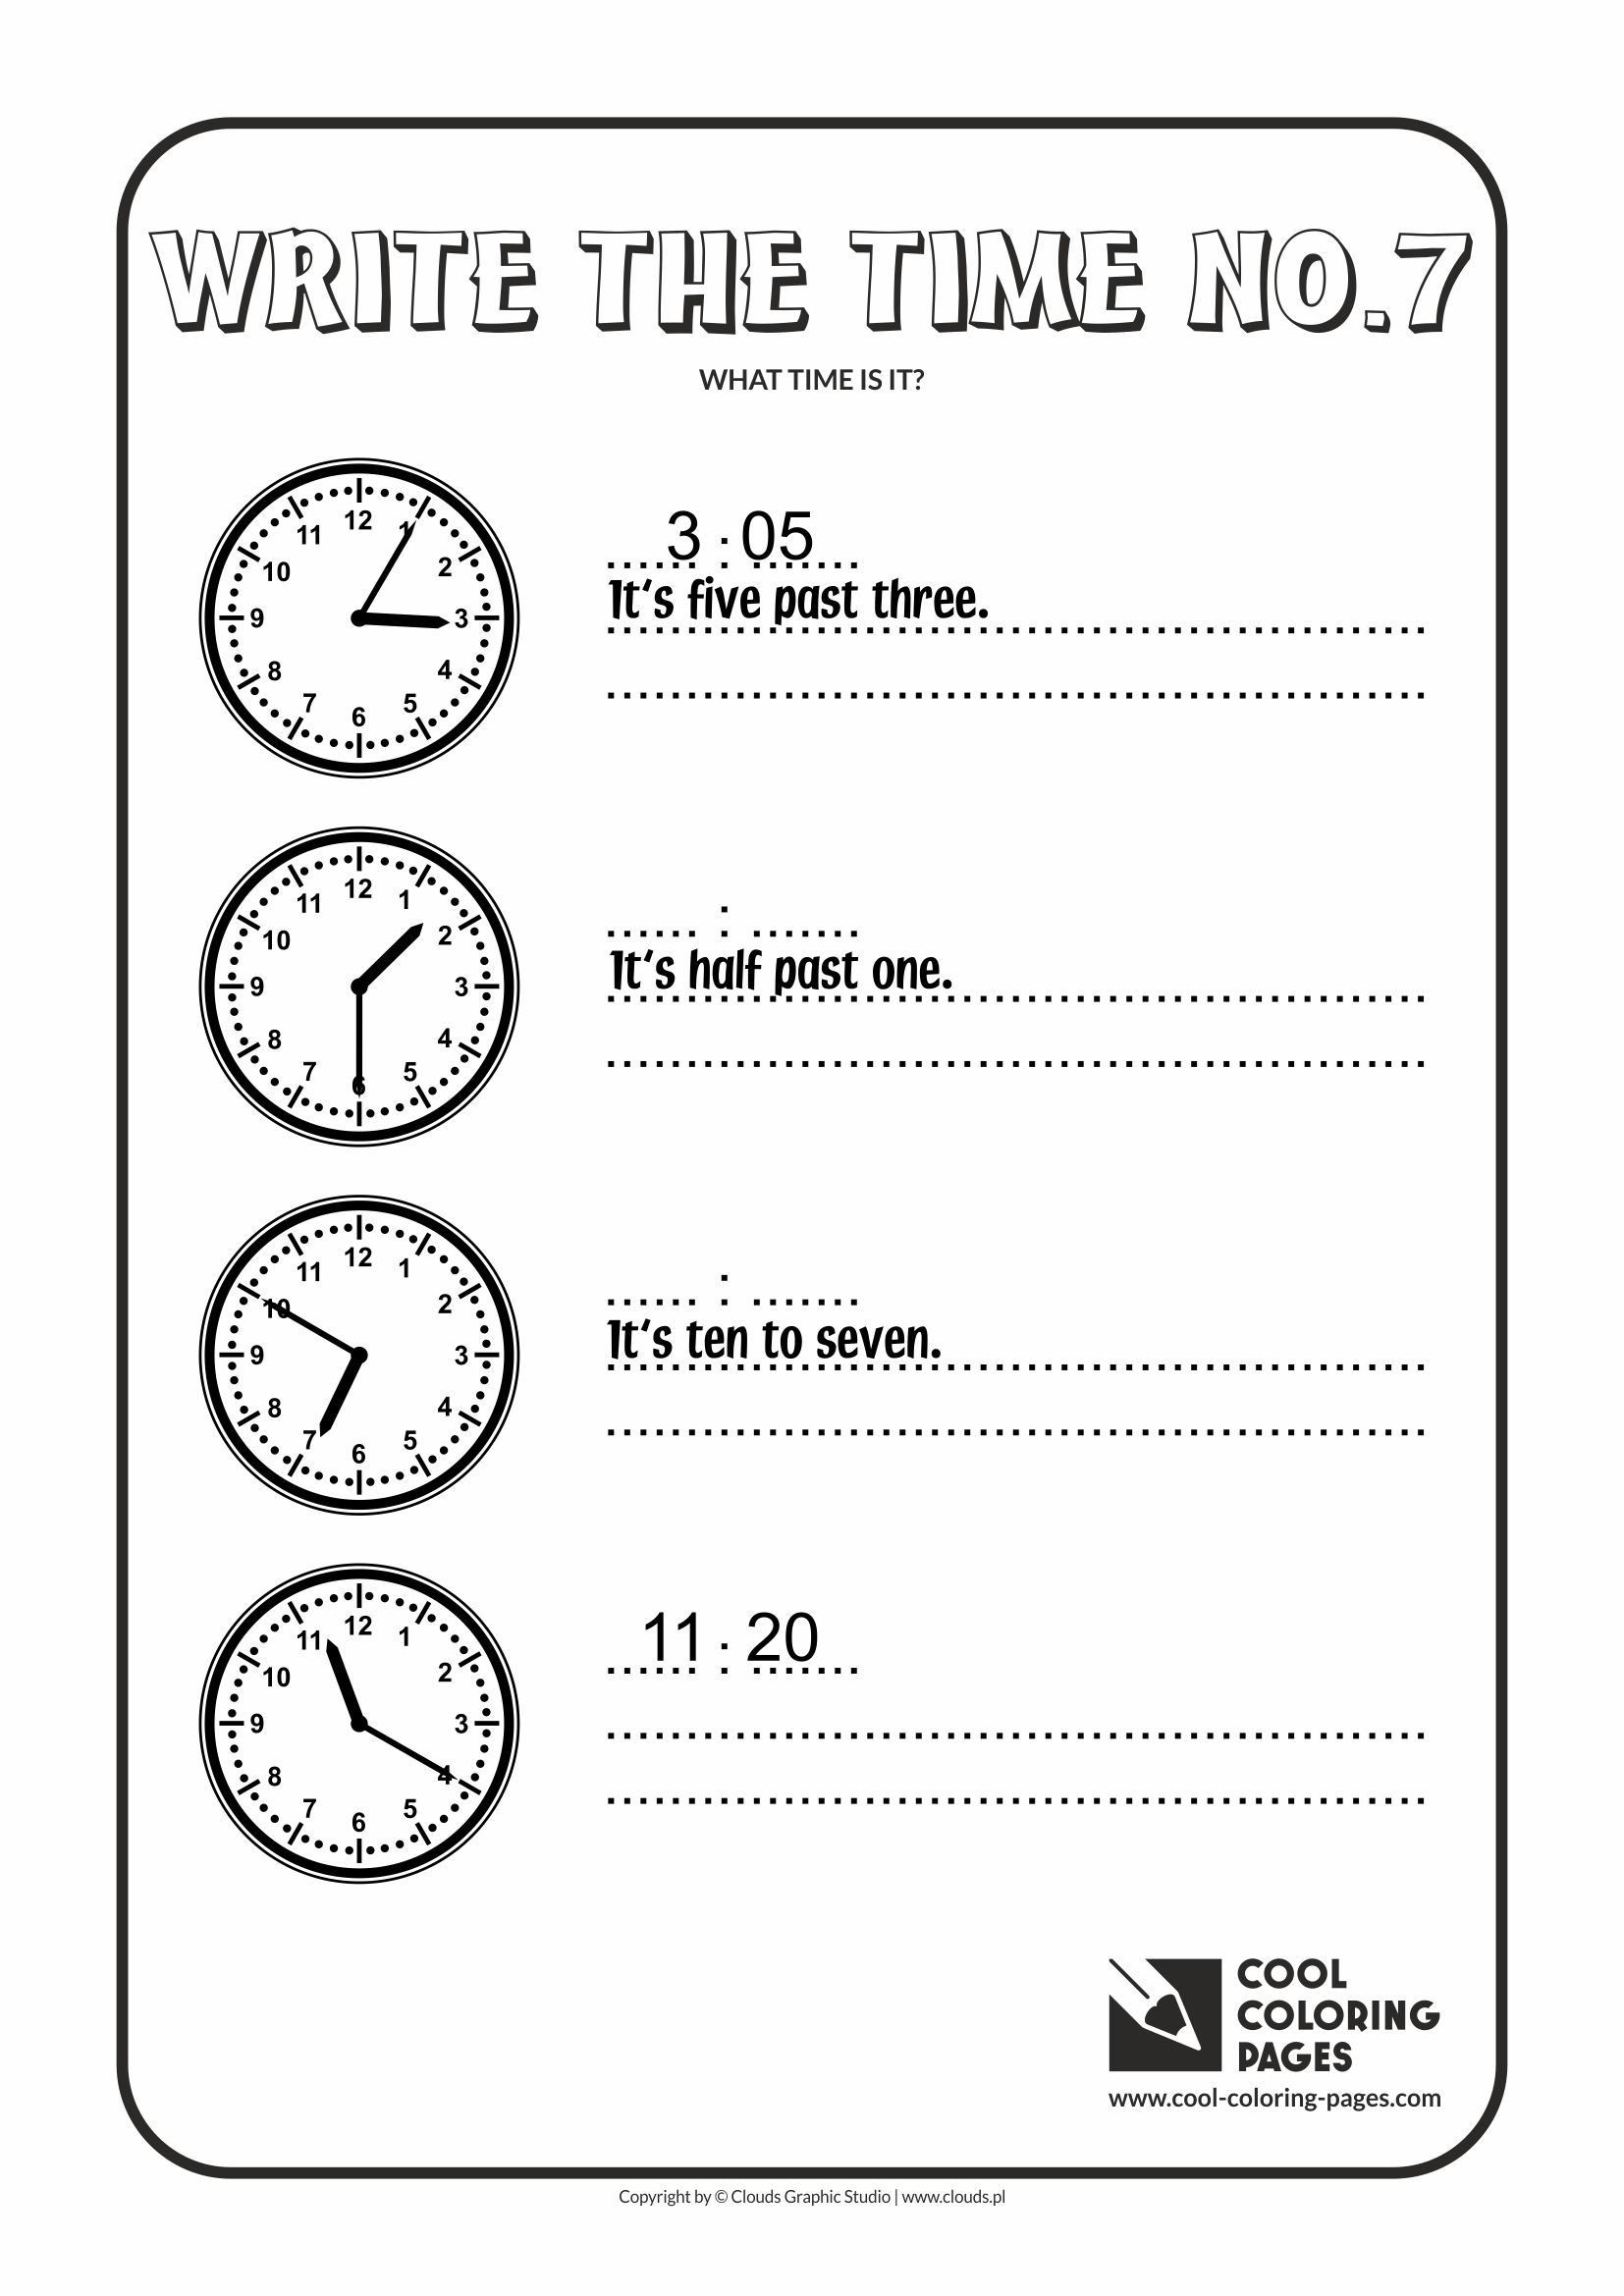 Cool Coloring Pages - Time / Write the time no.7